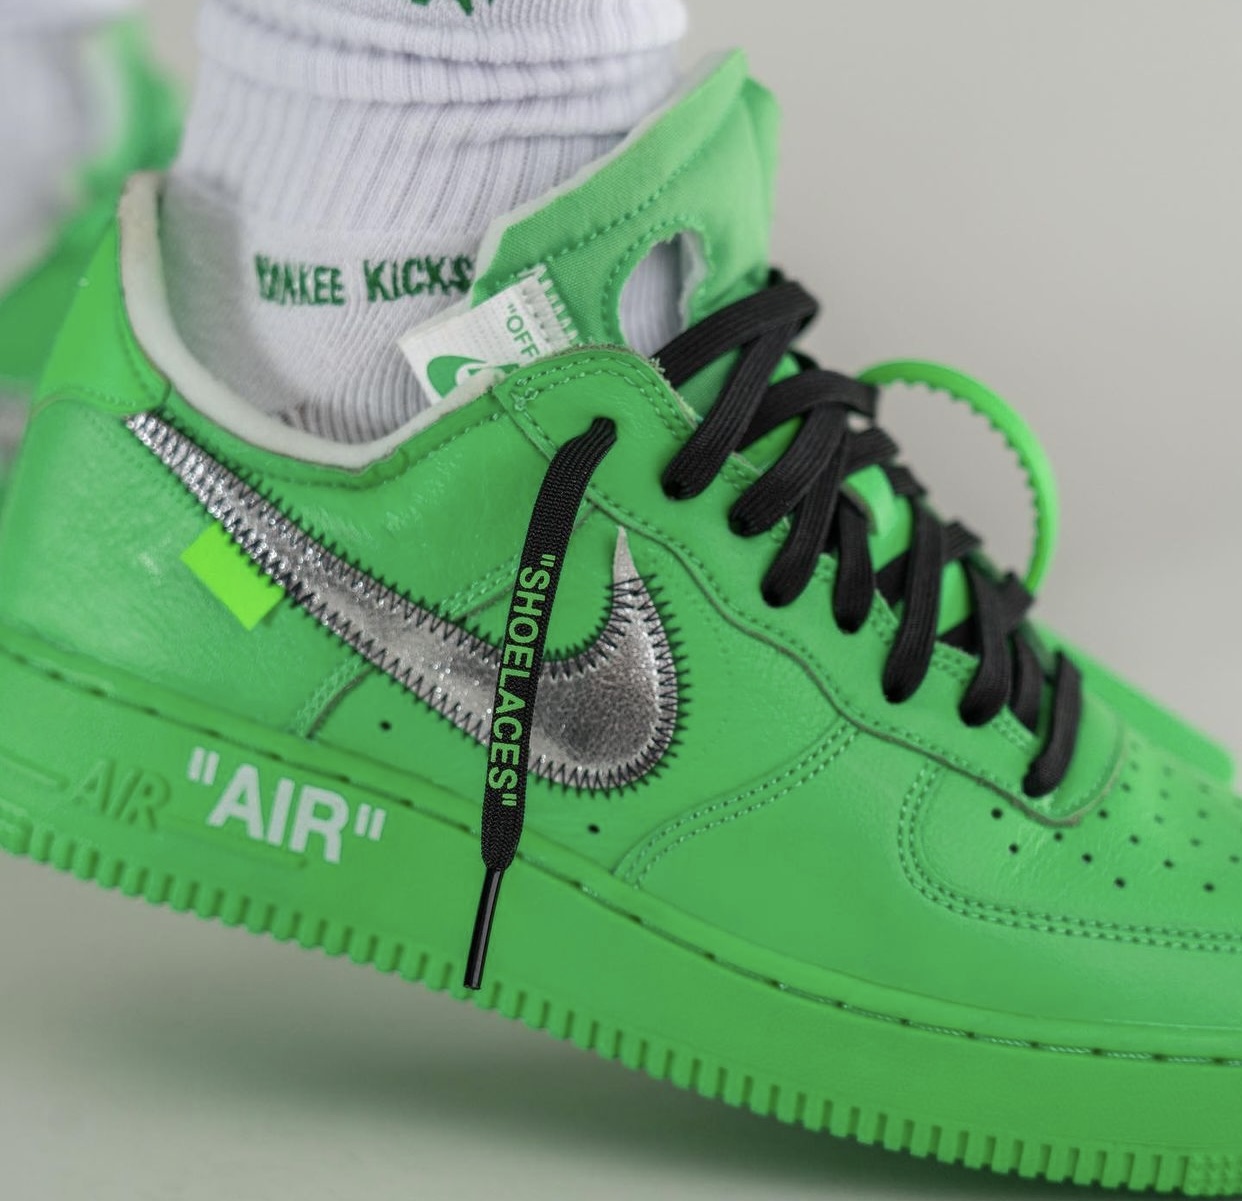 Nike Off-White Air Force 1 Shoes Brooklyn Light Green Spark DX1419-300 Men’s